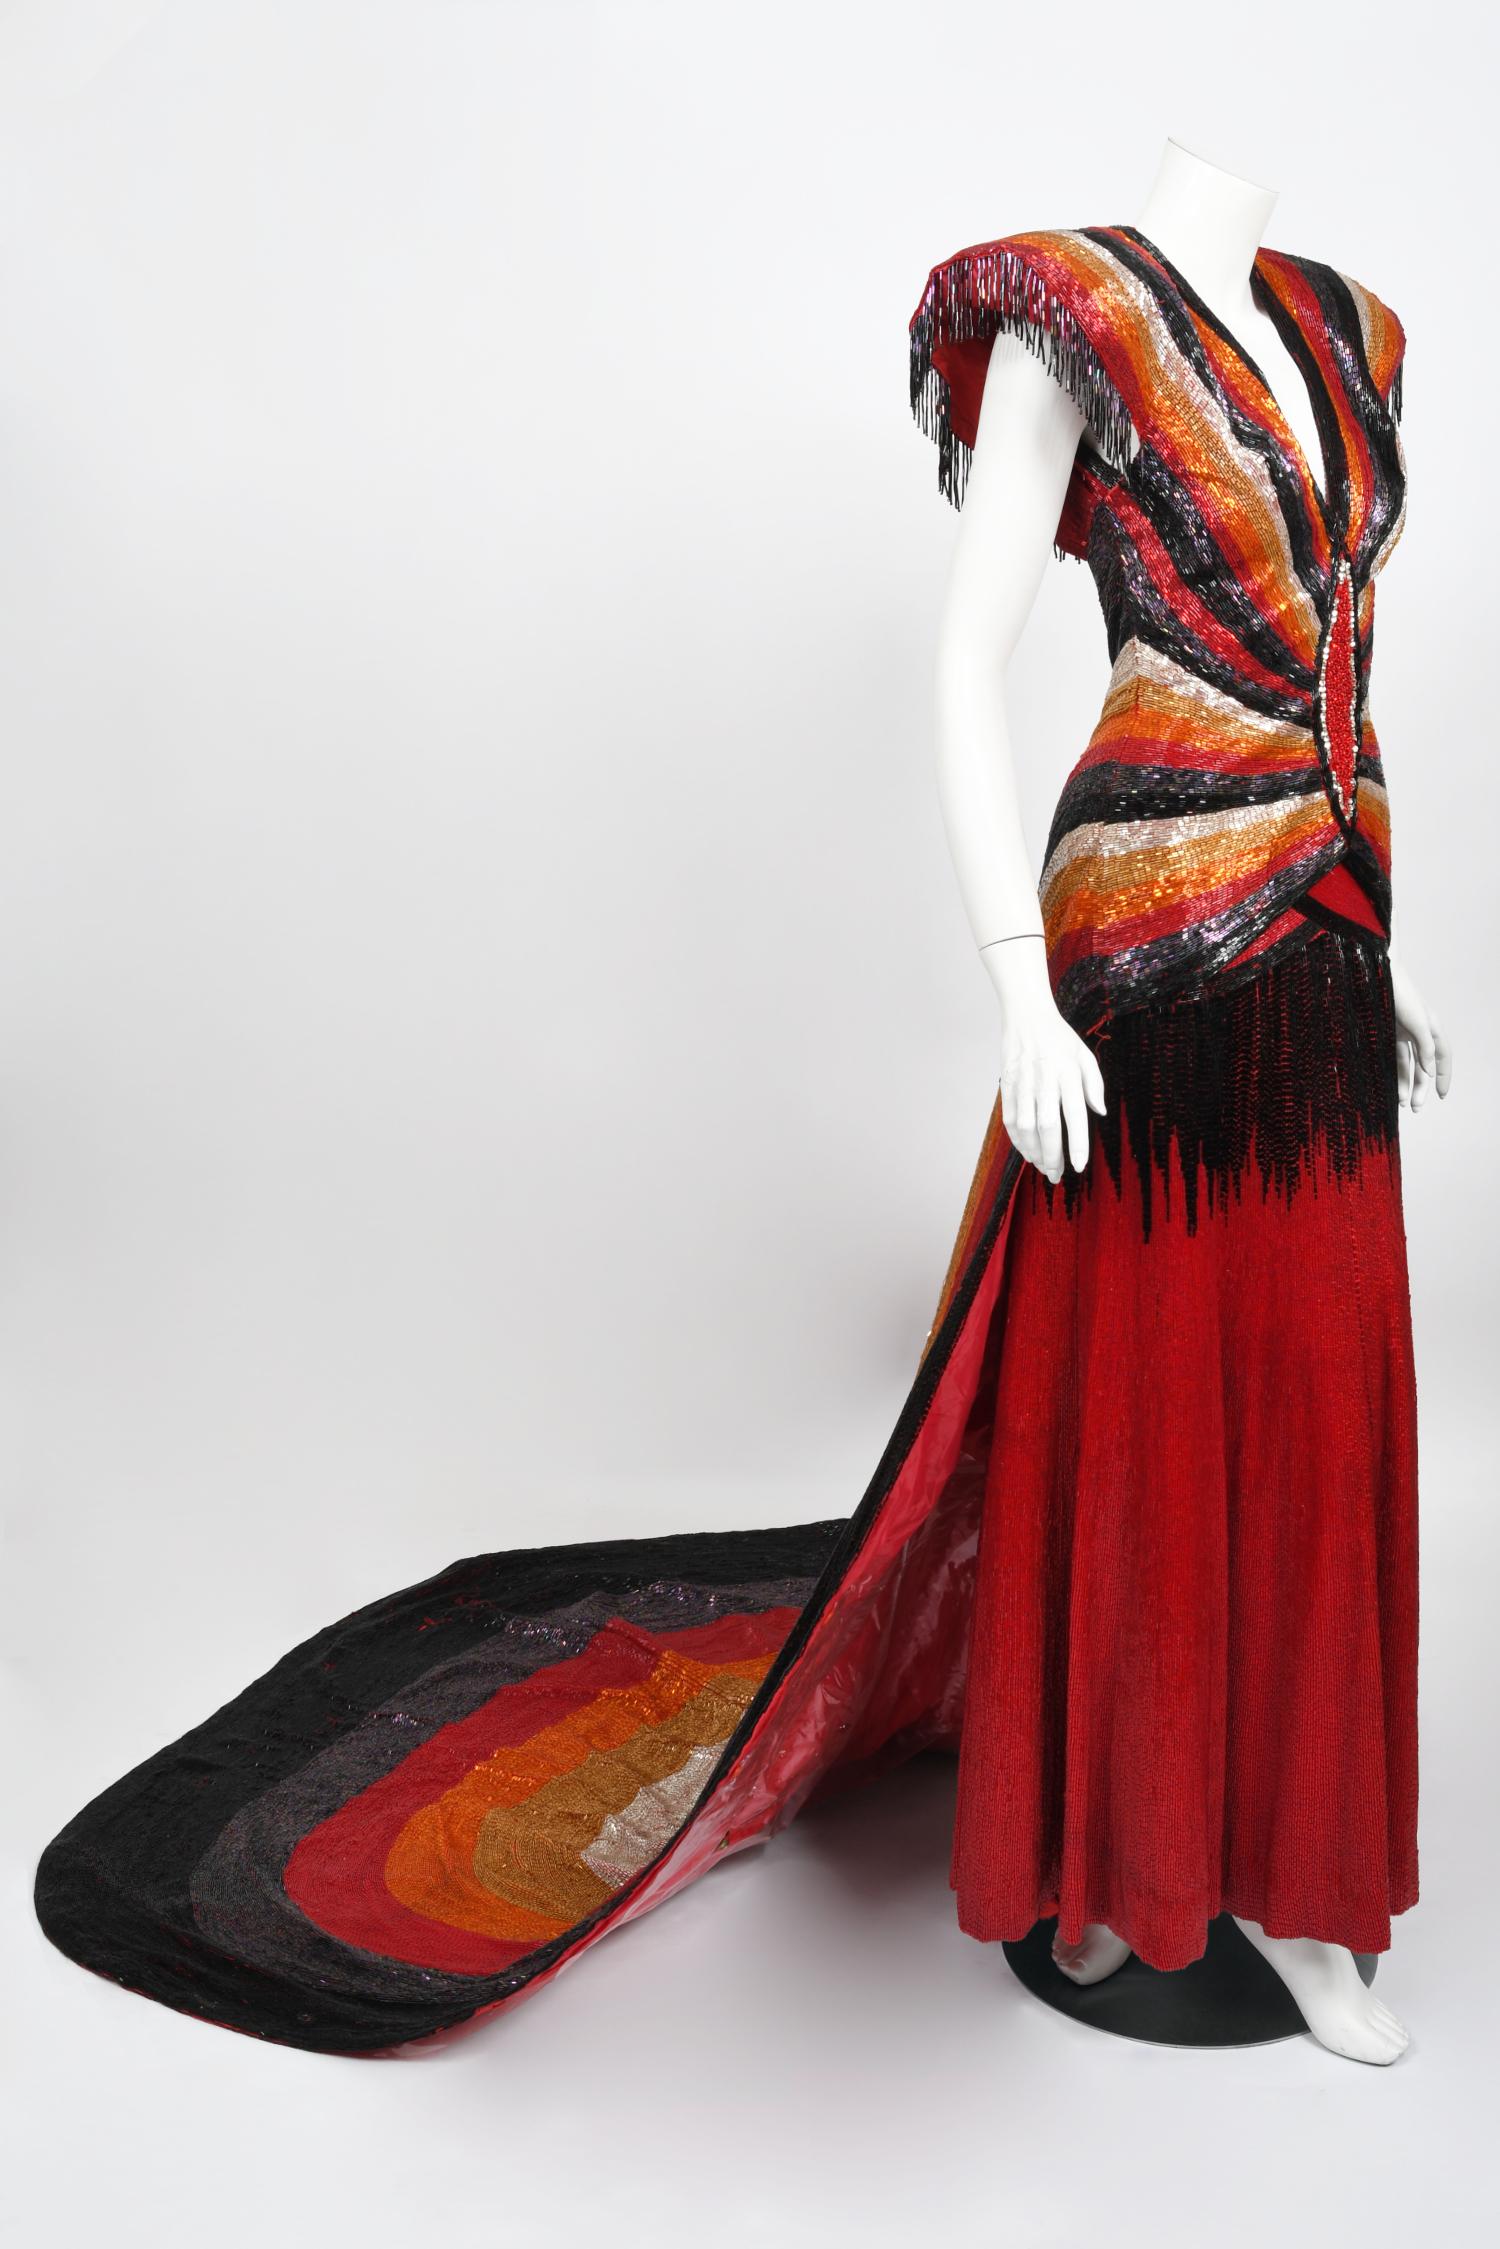 Iconic 1970s Museum Quality Fully Beaded Couture Backless Bias Cut Trained Gown  For Sale 10